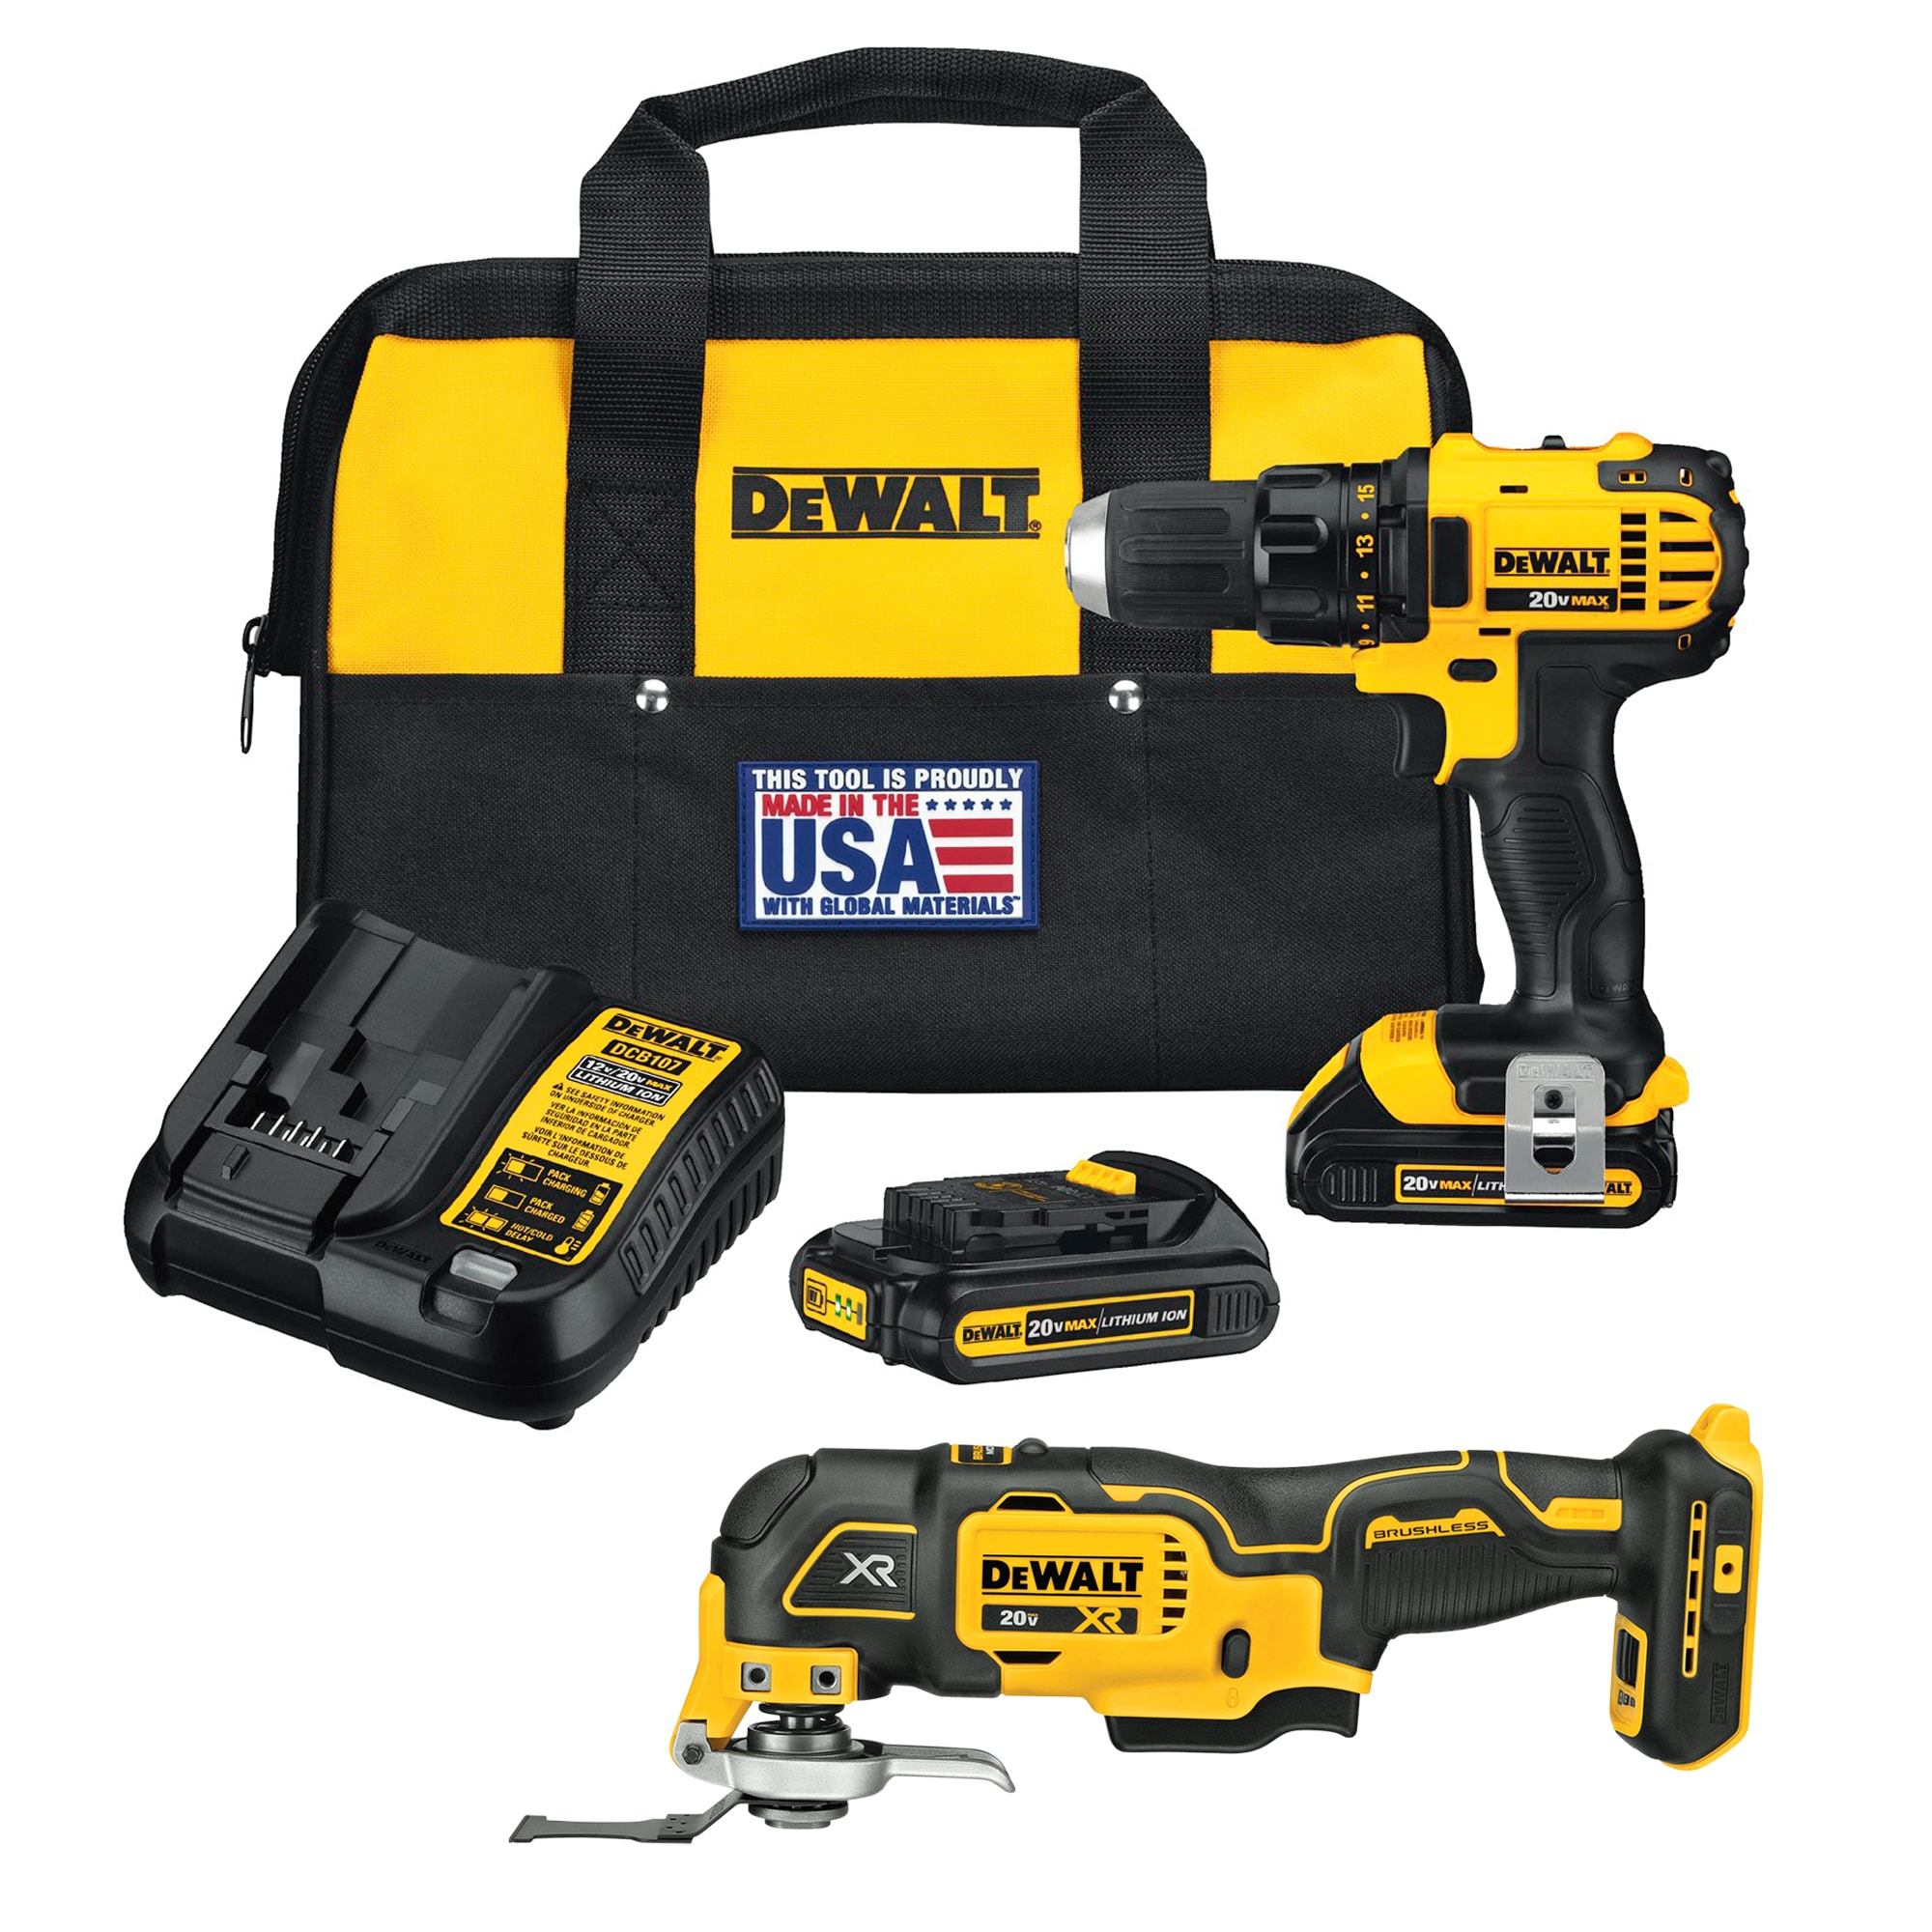 DEWALT 20-volt Max 1/2-in Brushless Cordless Drill (2-Batteries Included and Charger Included) & Cordless Brushless 20-volt Max Variable Speed